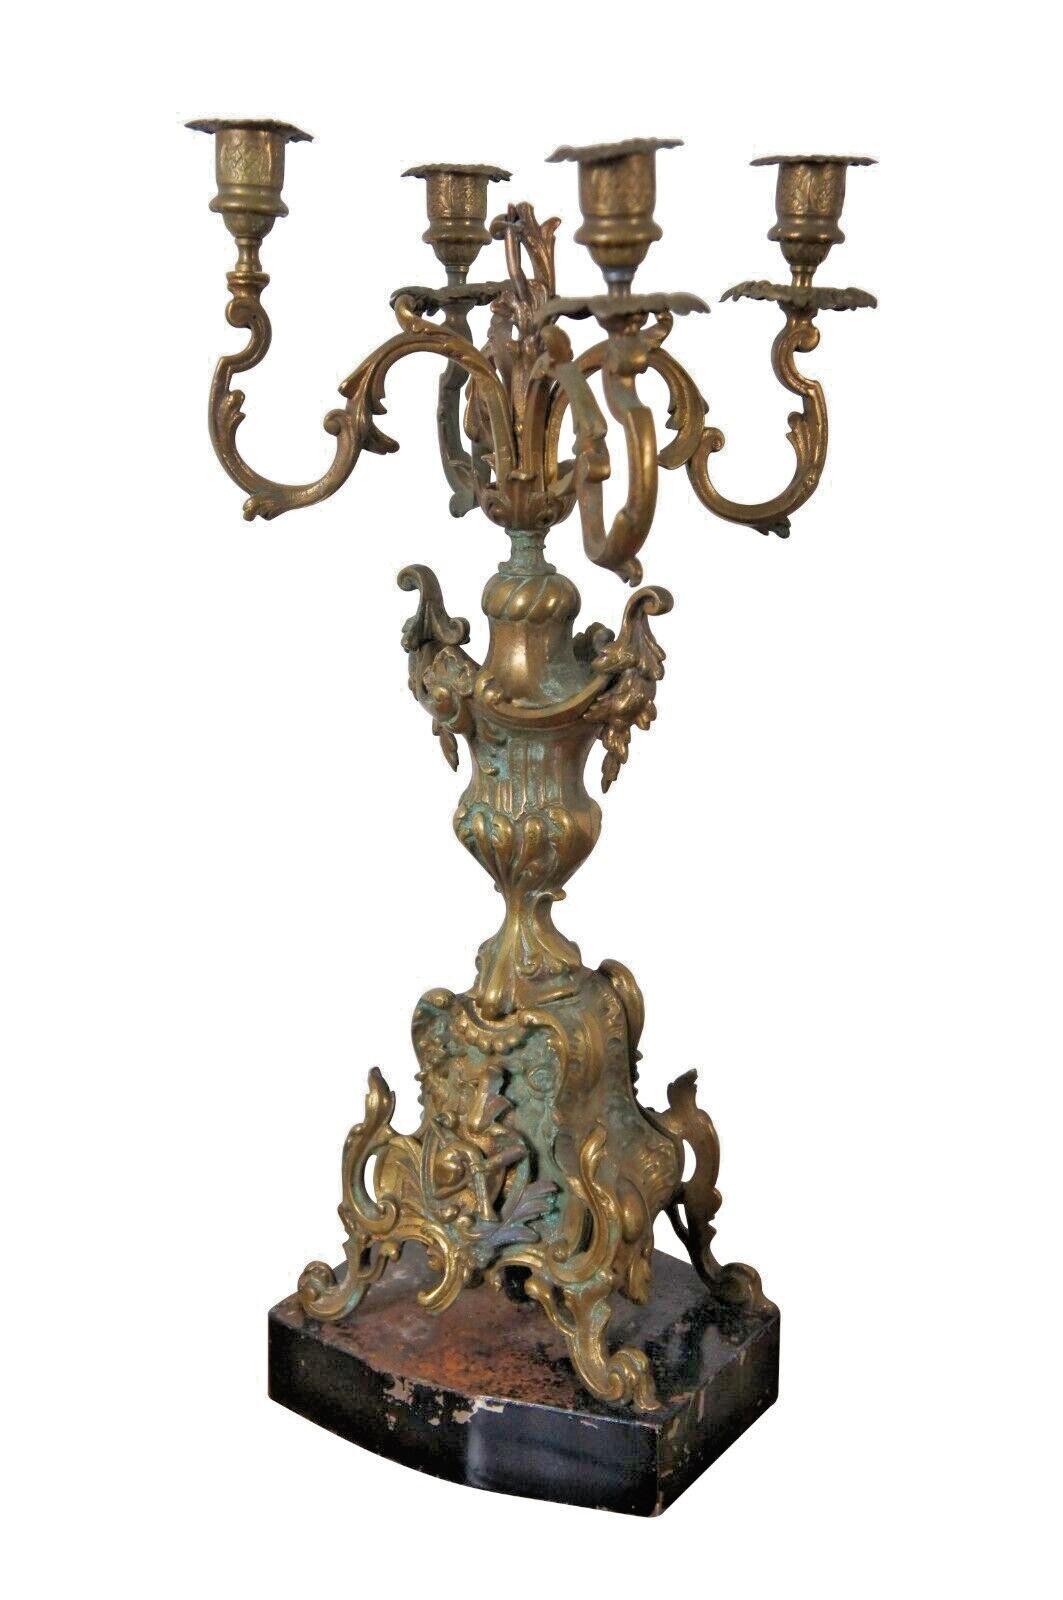 Pair of antique bronze baroque style four arm candelabras, mounted on black painted metal bases and partially converted for electrics.

Dimensions:
10